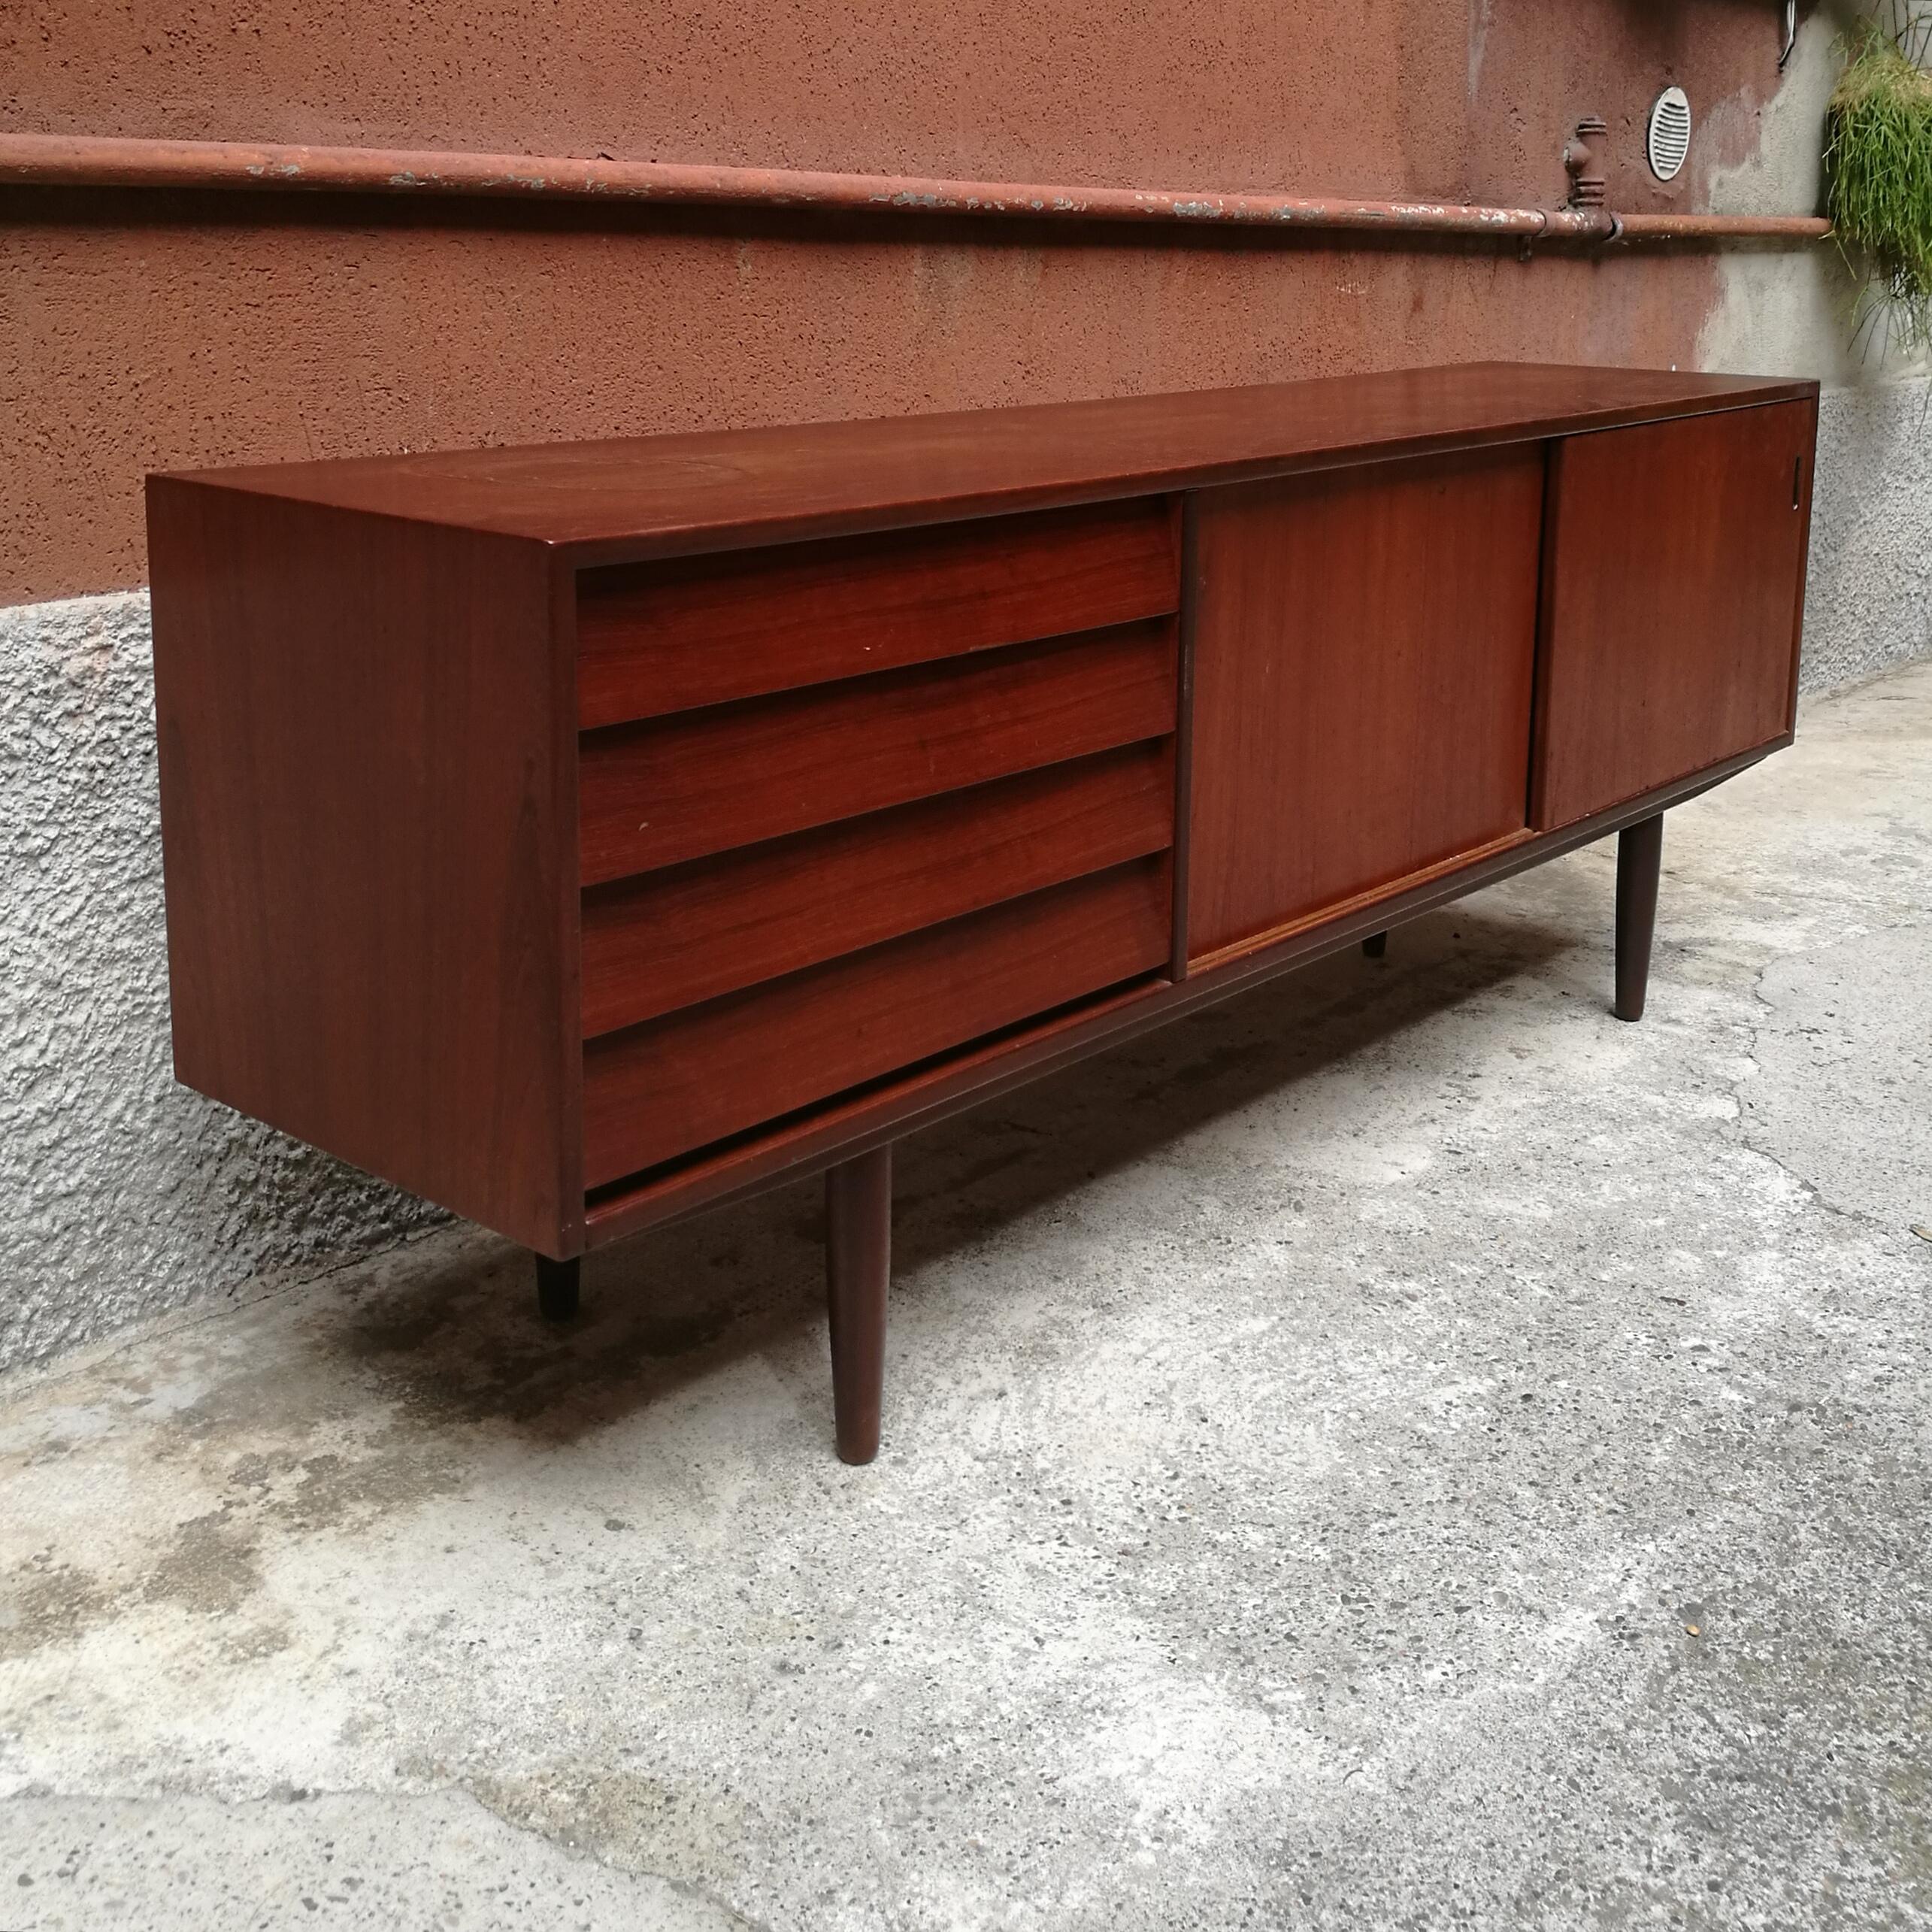 Mid-20th Century Amazing Sideboard in Teak with Drawers and Sliding Doors 1960 Denmark